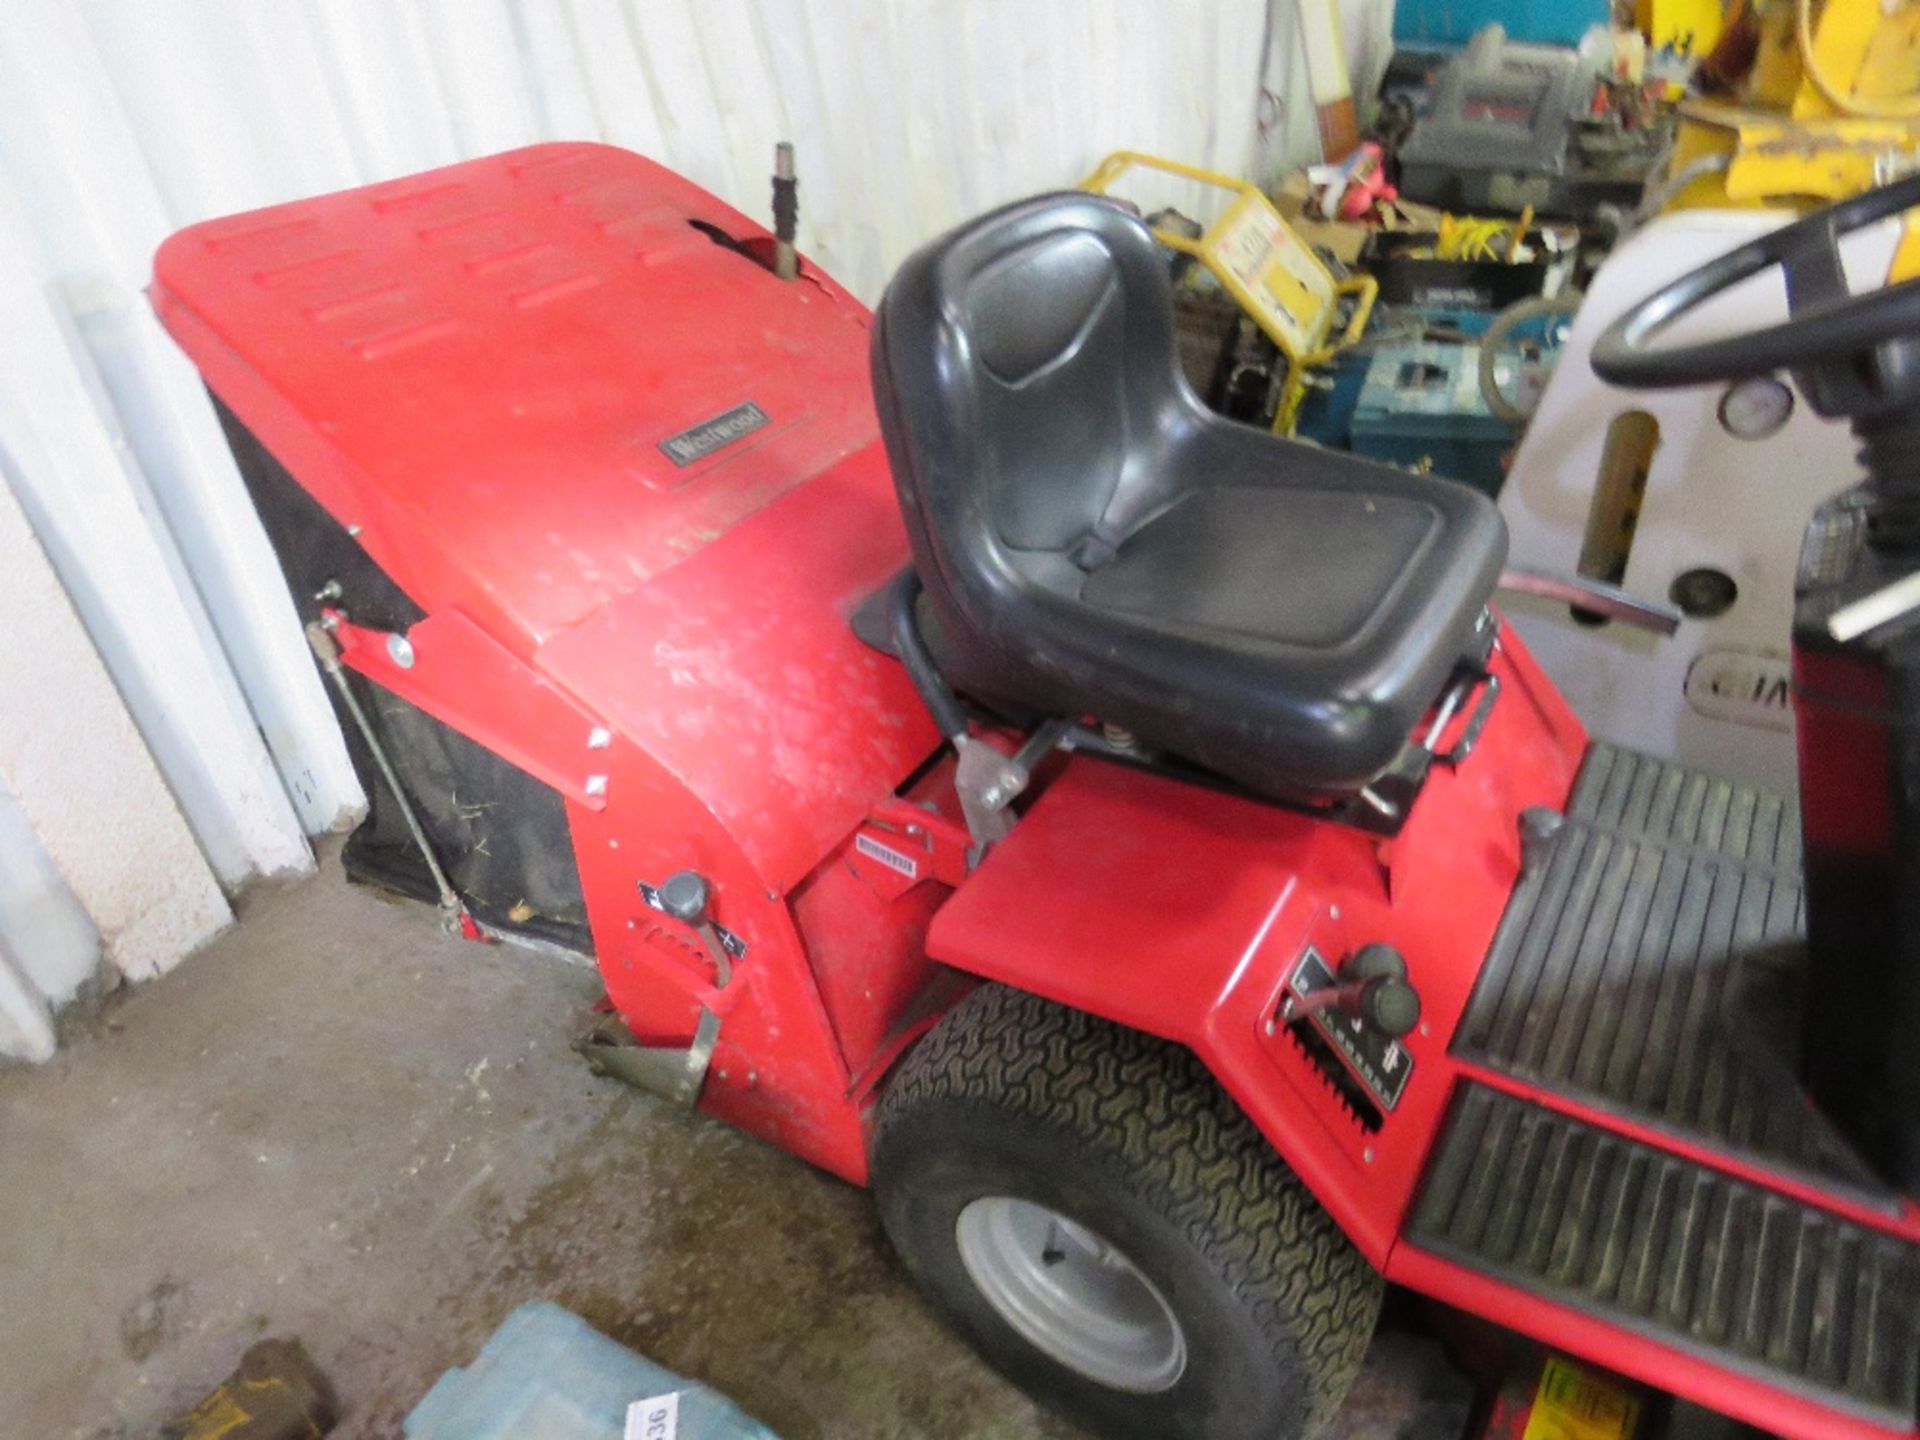 WESTWOOD T1600 HYDRO RIDE ON MOWER WITH COLLECTOR. WHEN TESTED WAS SEEN TO RUN, DRIVE, AND BLADES TU - Image 2 of 5